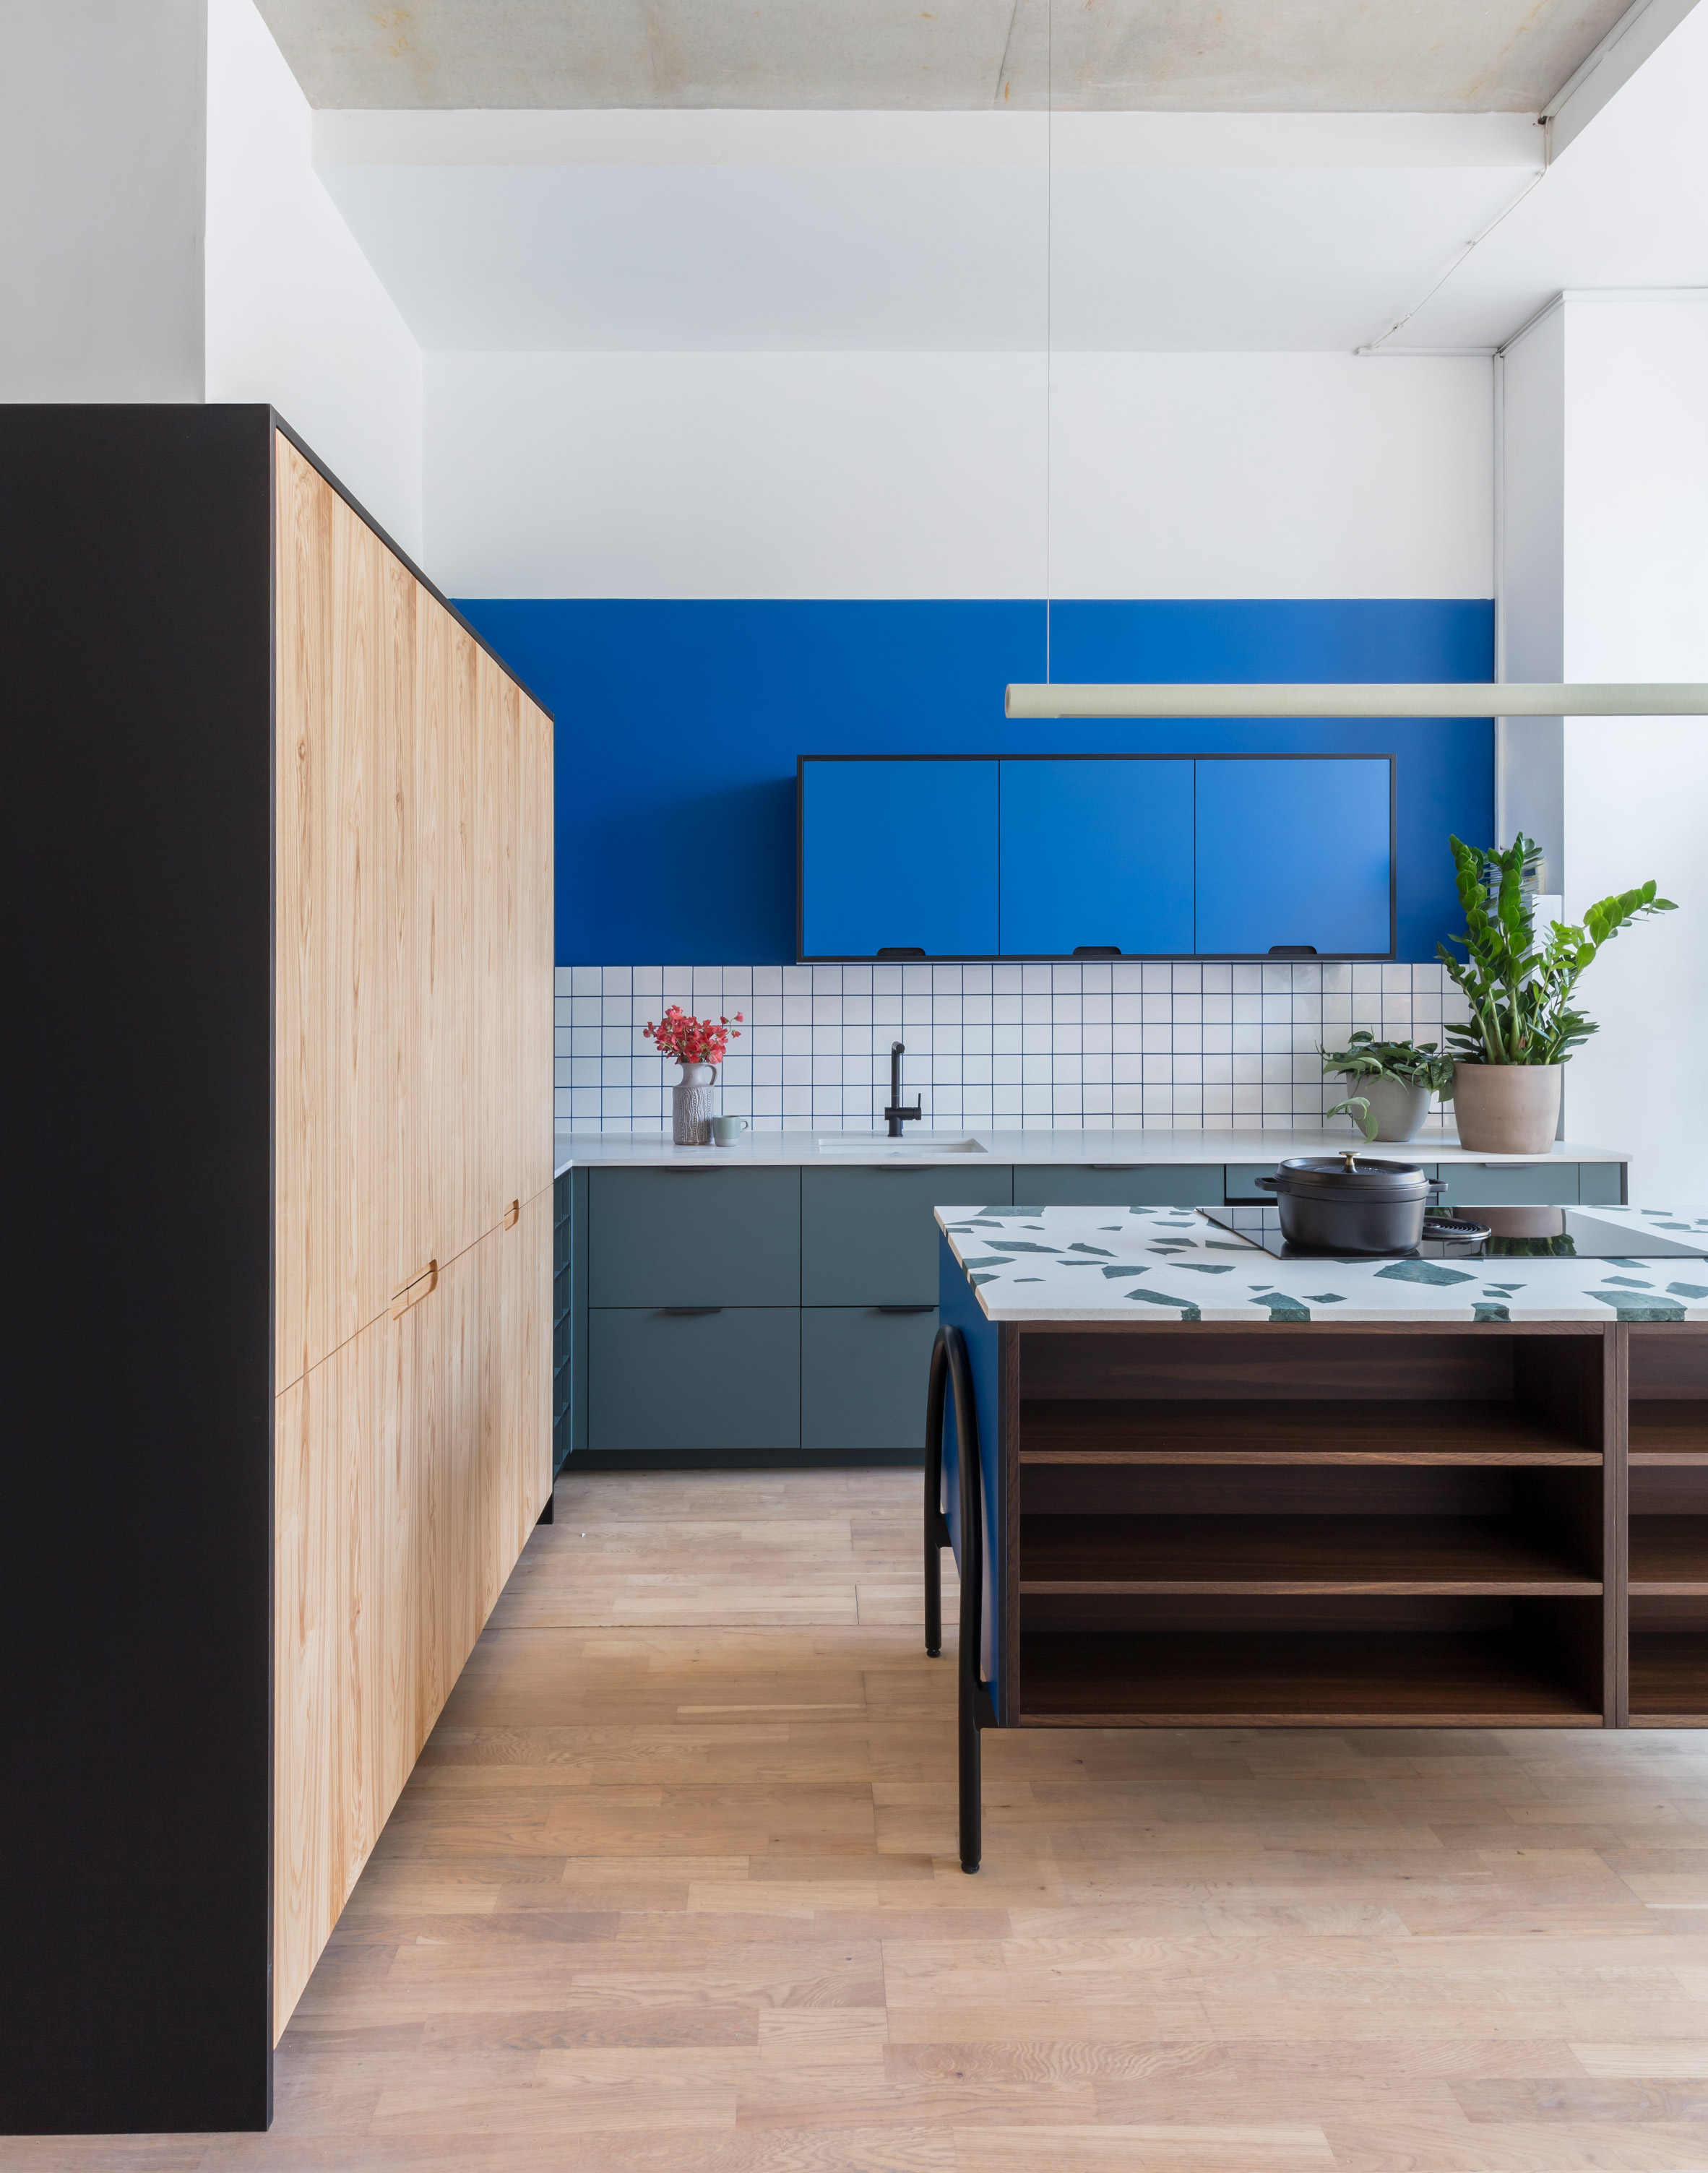 HØLTE showroom and studio for customising IKEA kitchens